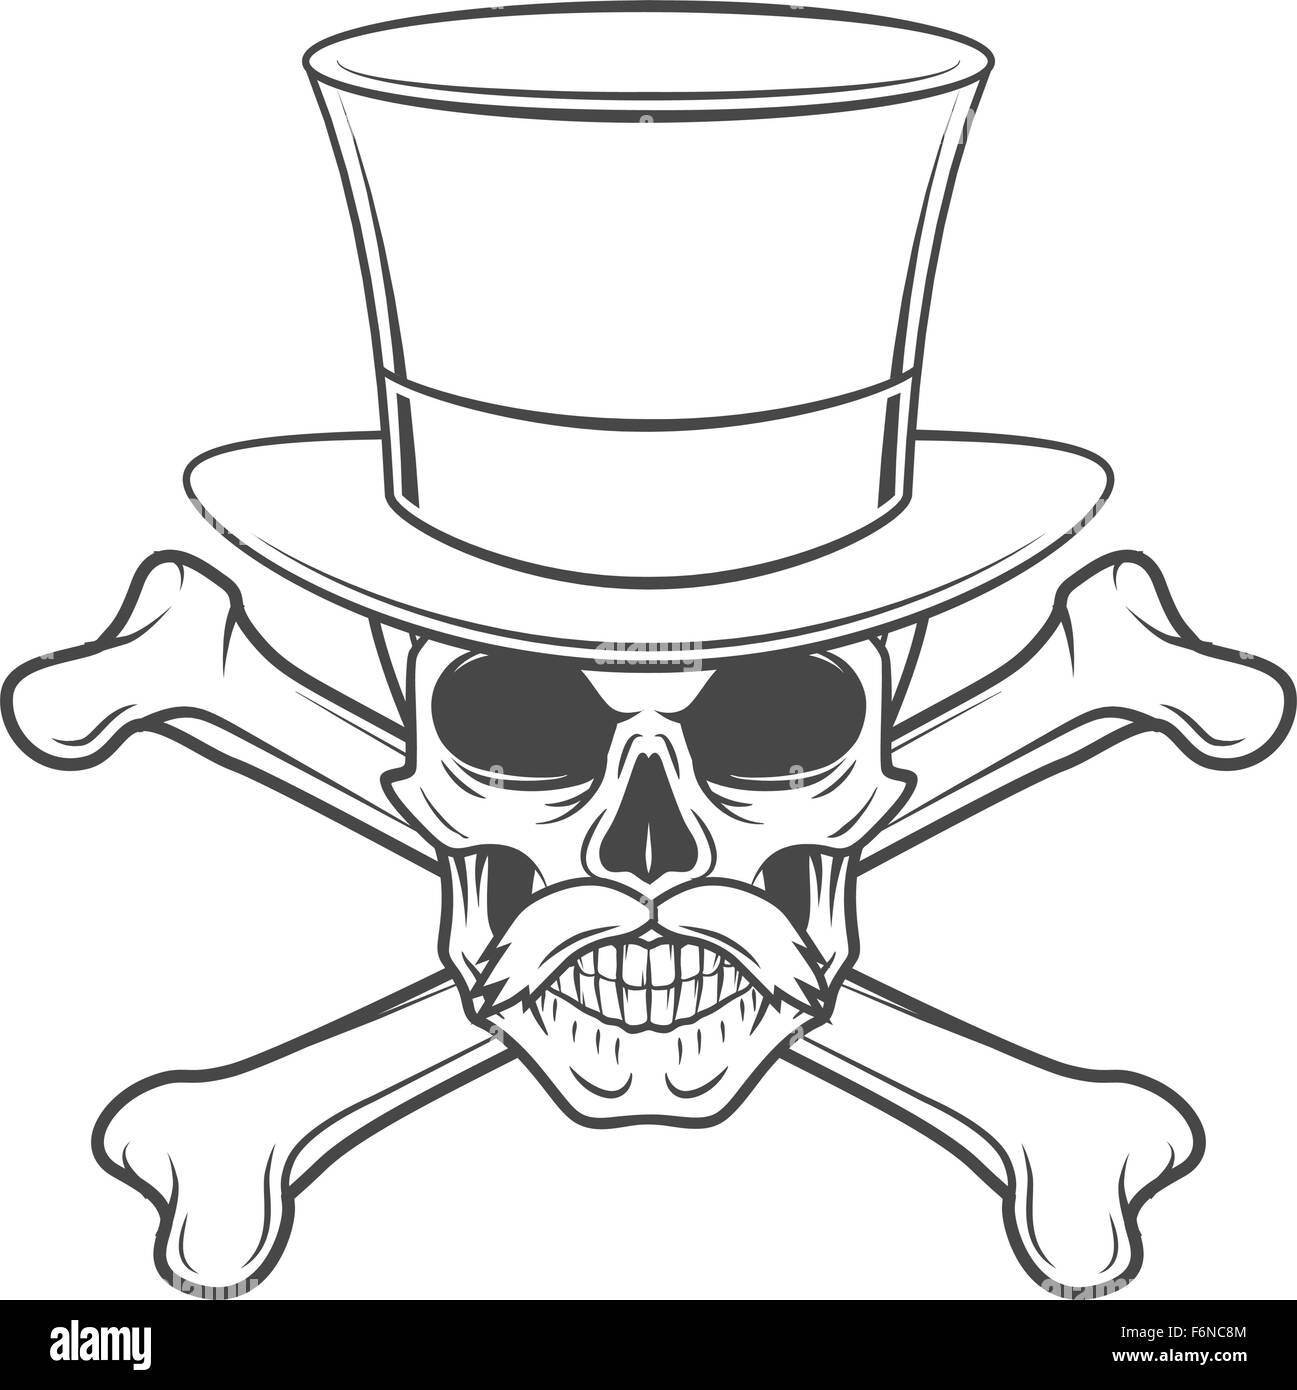 Outlaw skull with mustache, high hat and crossbones portrait. Crossbones head hunter logo template. Steampunk rover t-shirt insignia design Stock Vector